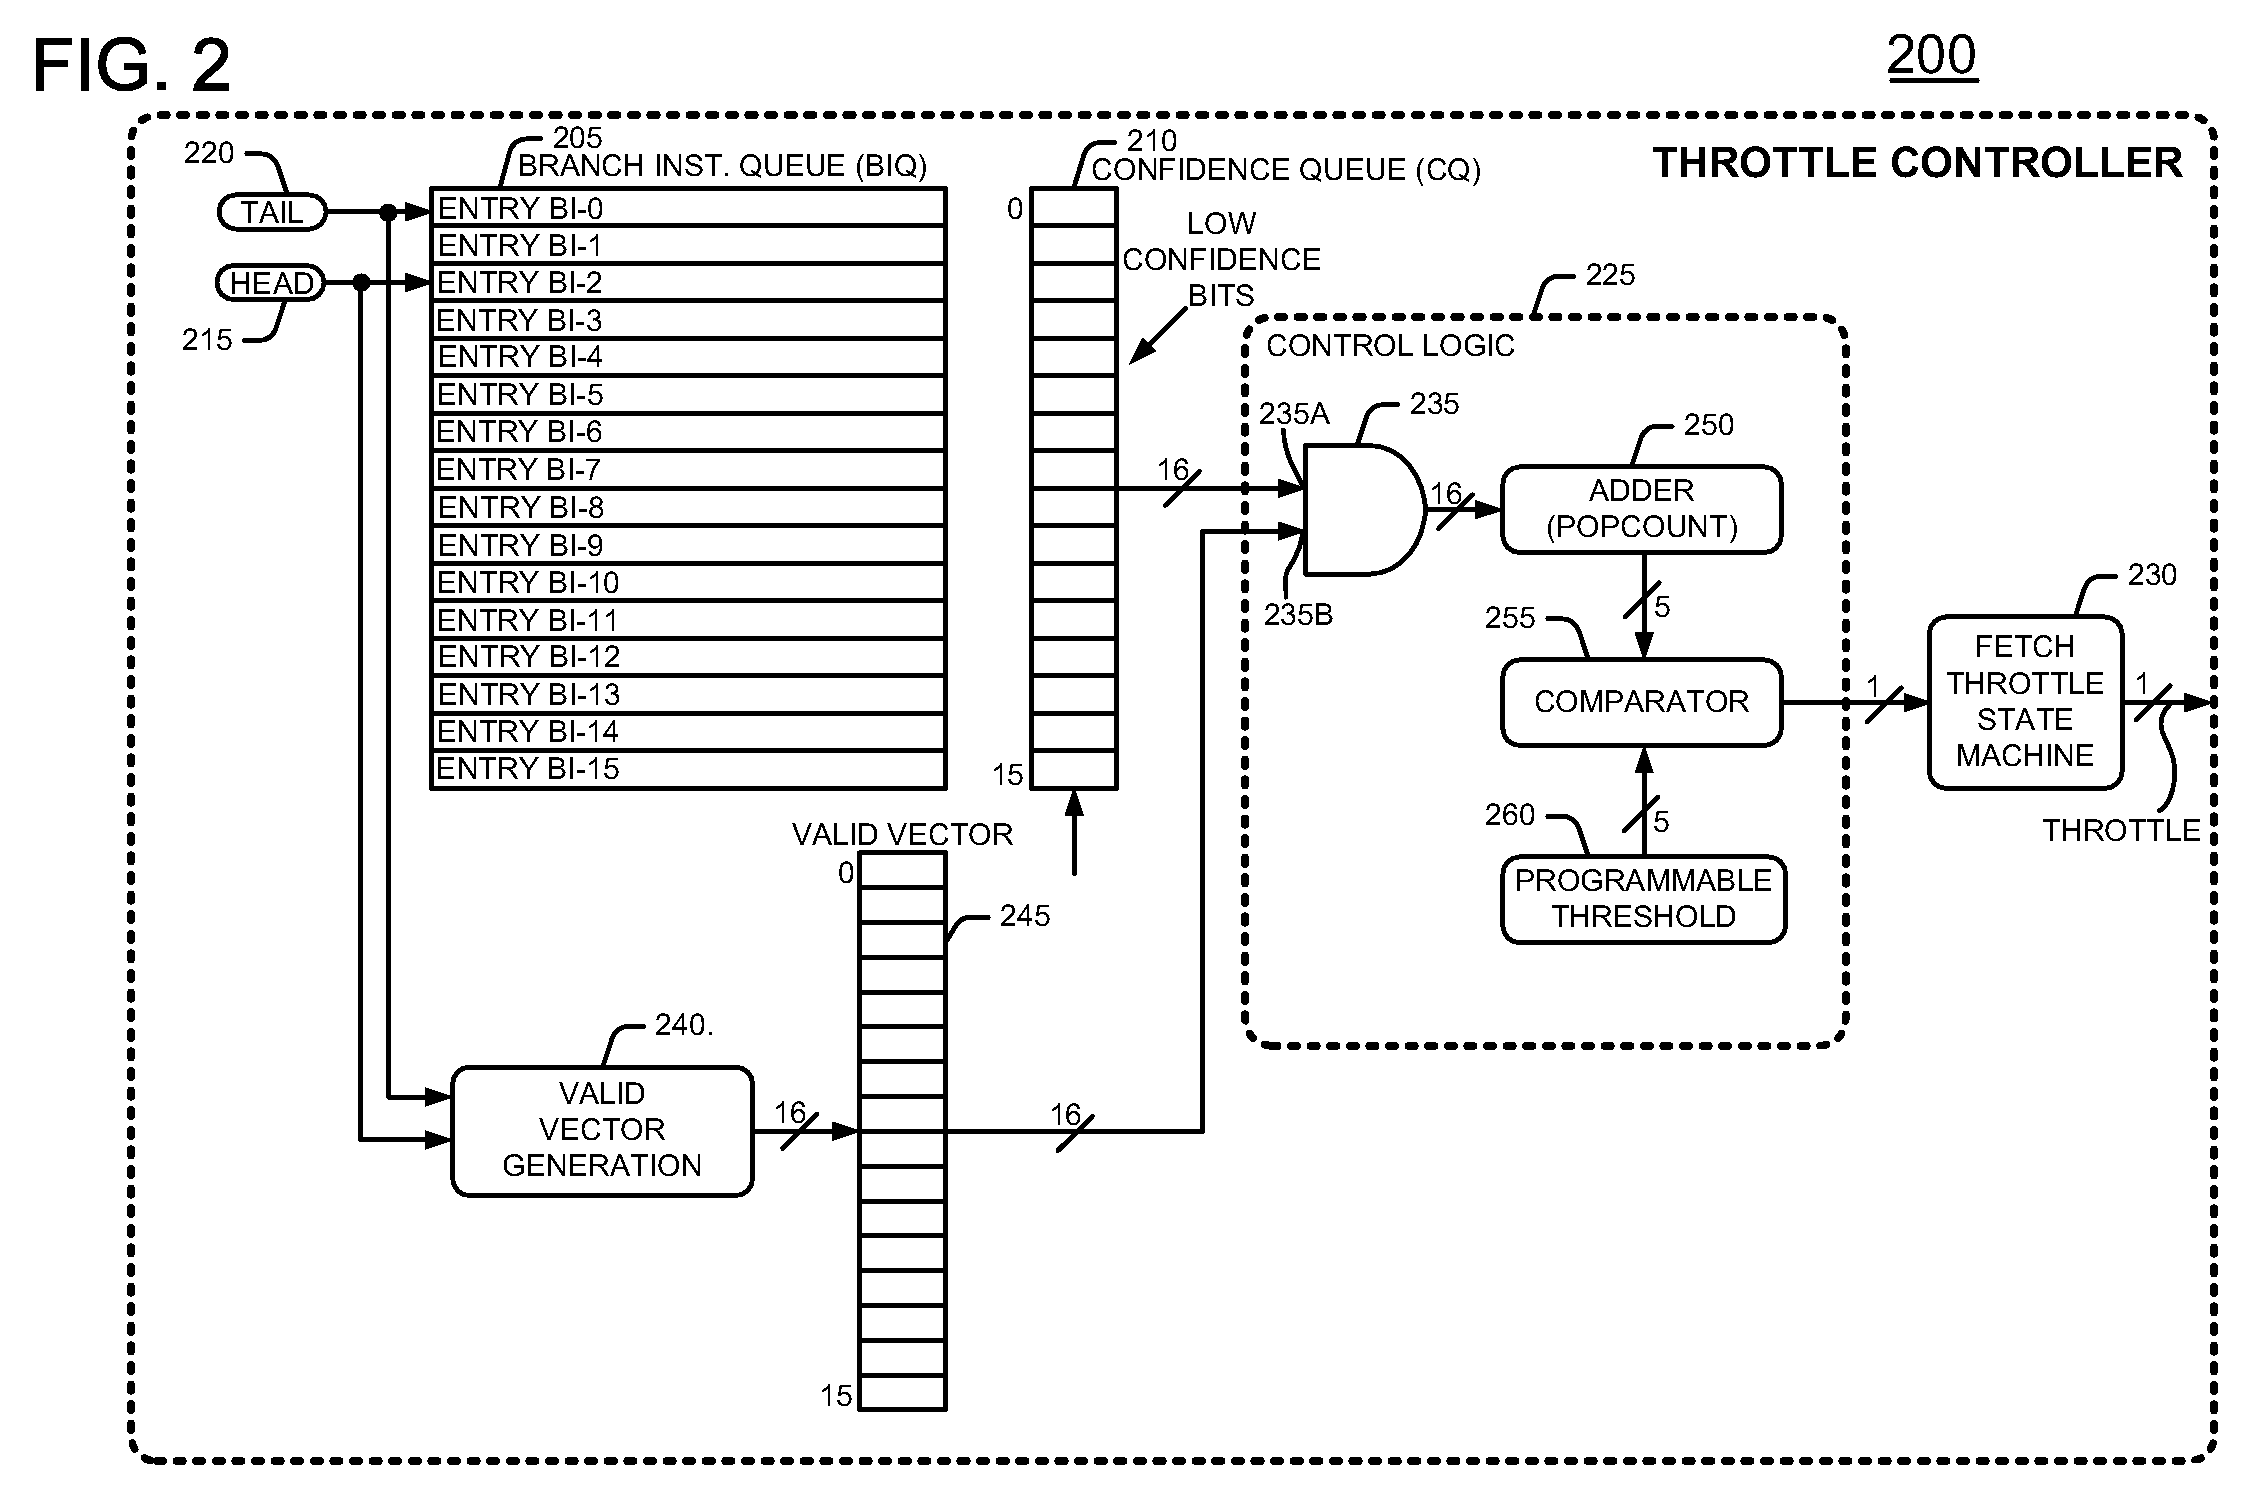 Method and apparatus for conserving power by throttling instruction fetching when a processor encounters low confidence branches in an information handling system